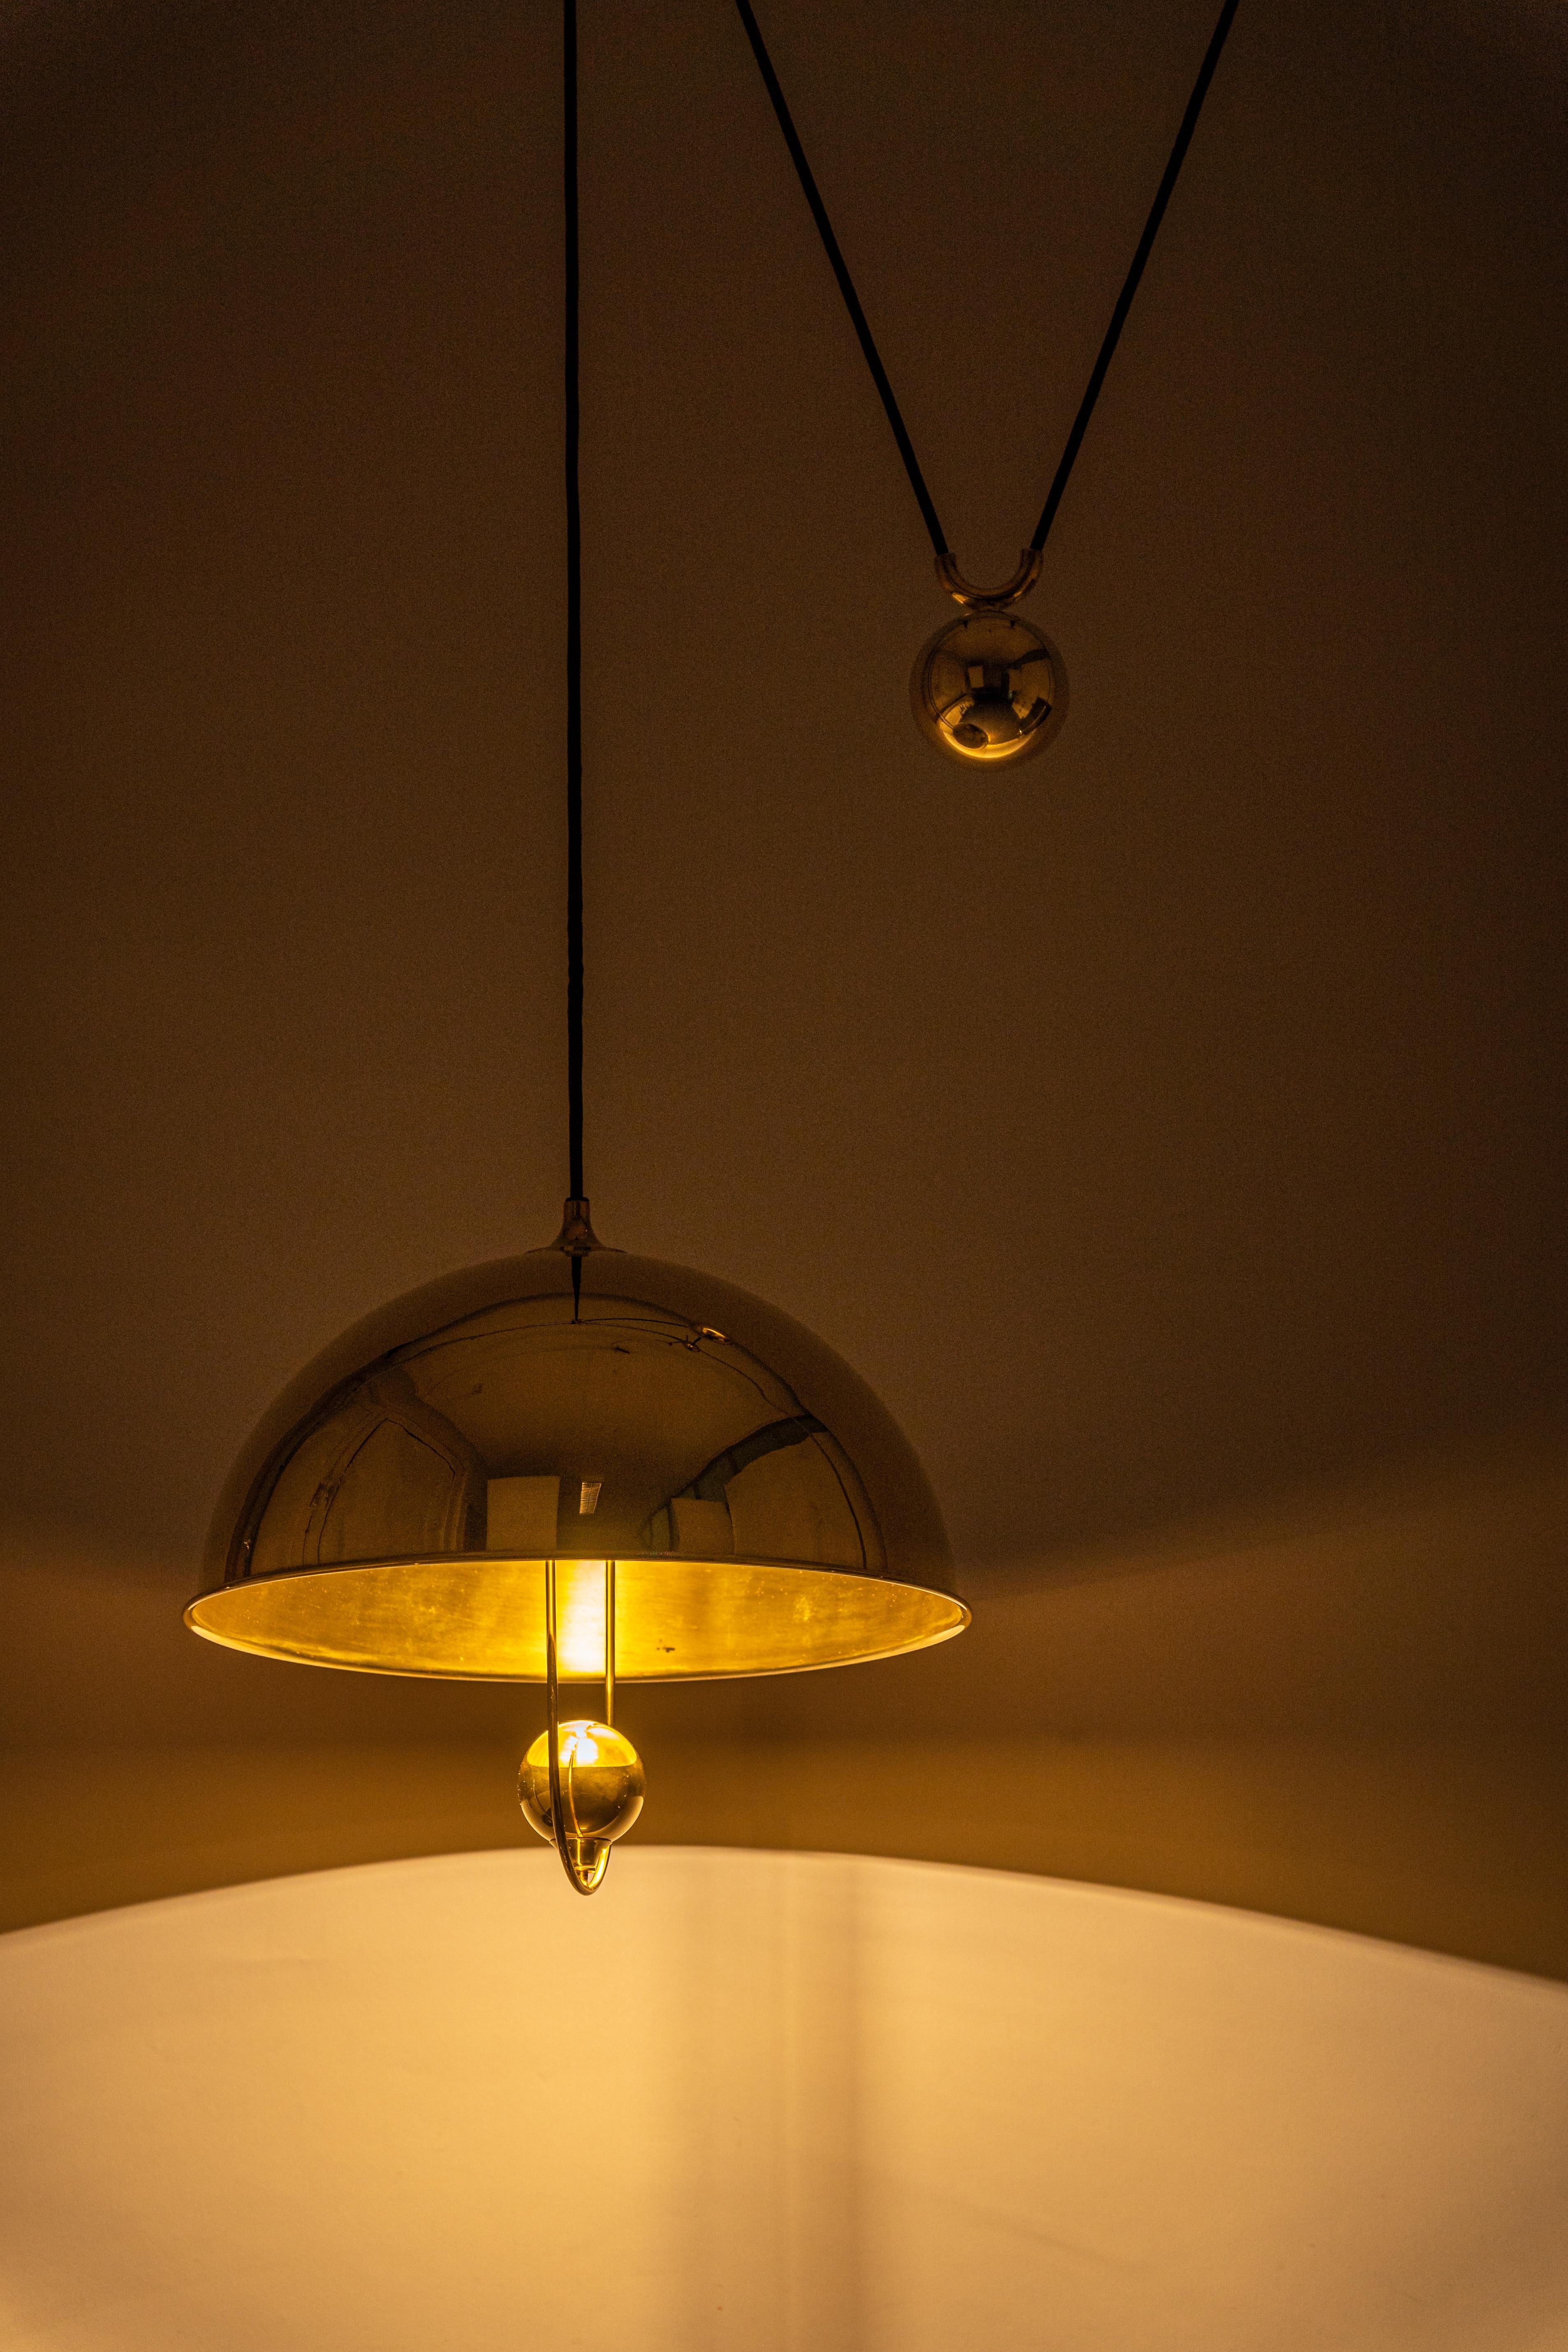 Large Adjustable Brass Counterweight Pendant Light by Florian Schulz, Germany 2